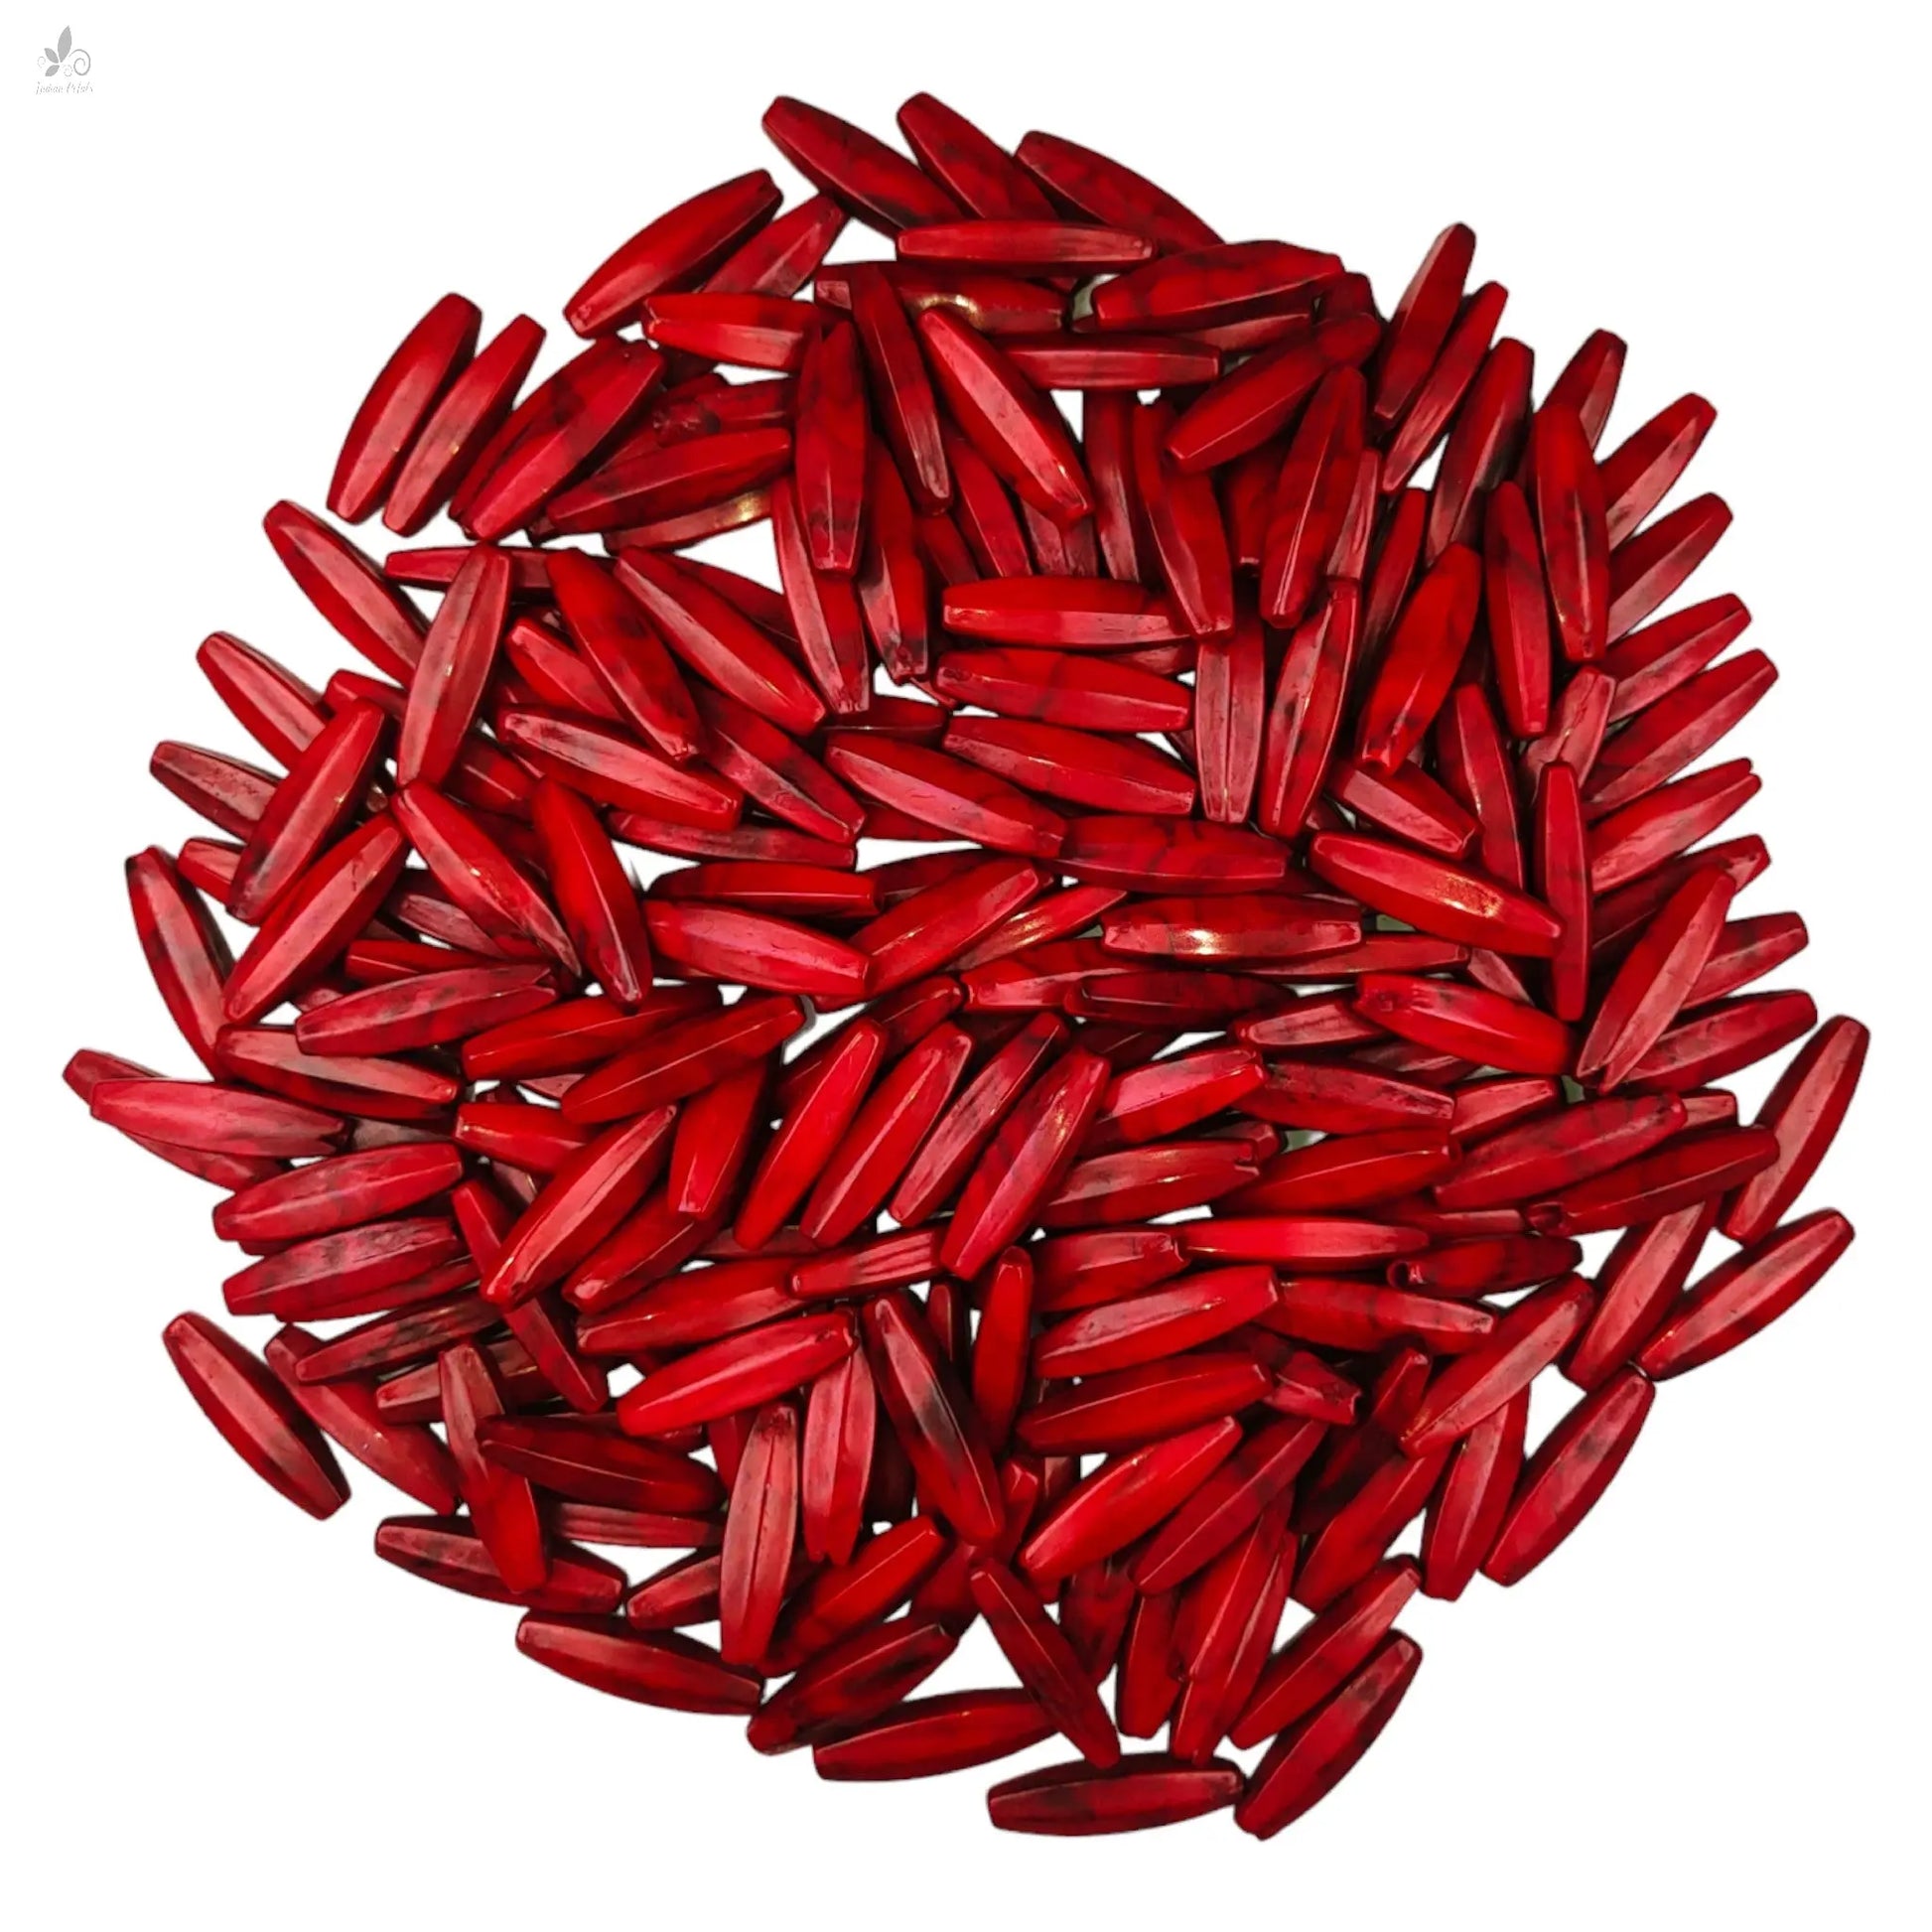 Indian Petals Dark Red Resin Pipe Motif for Craft or Decoration, Jewelry Making - 13558